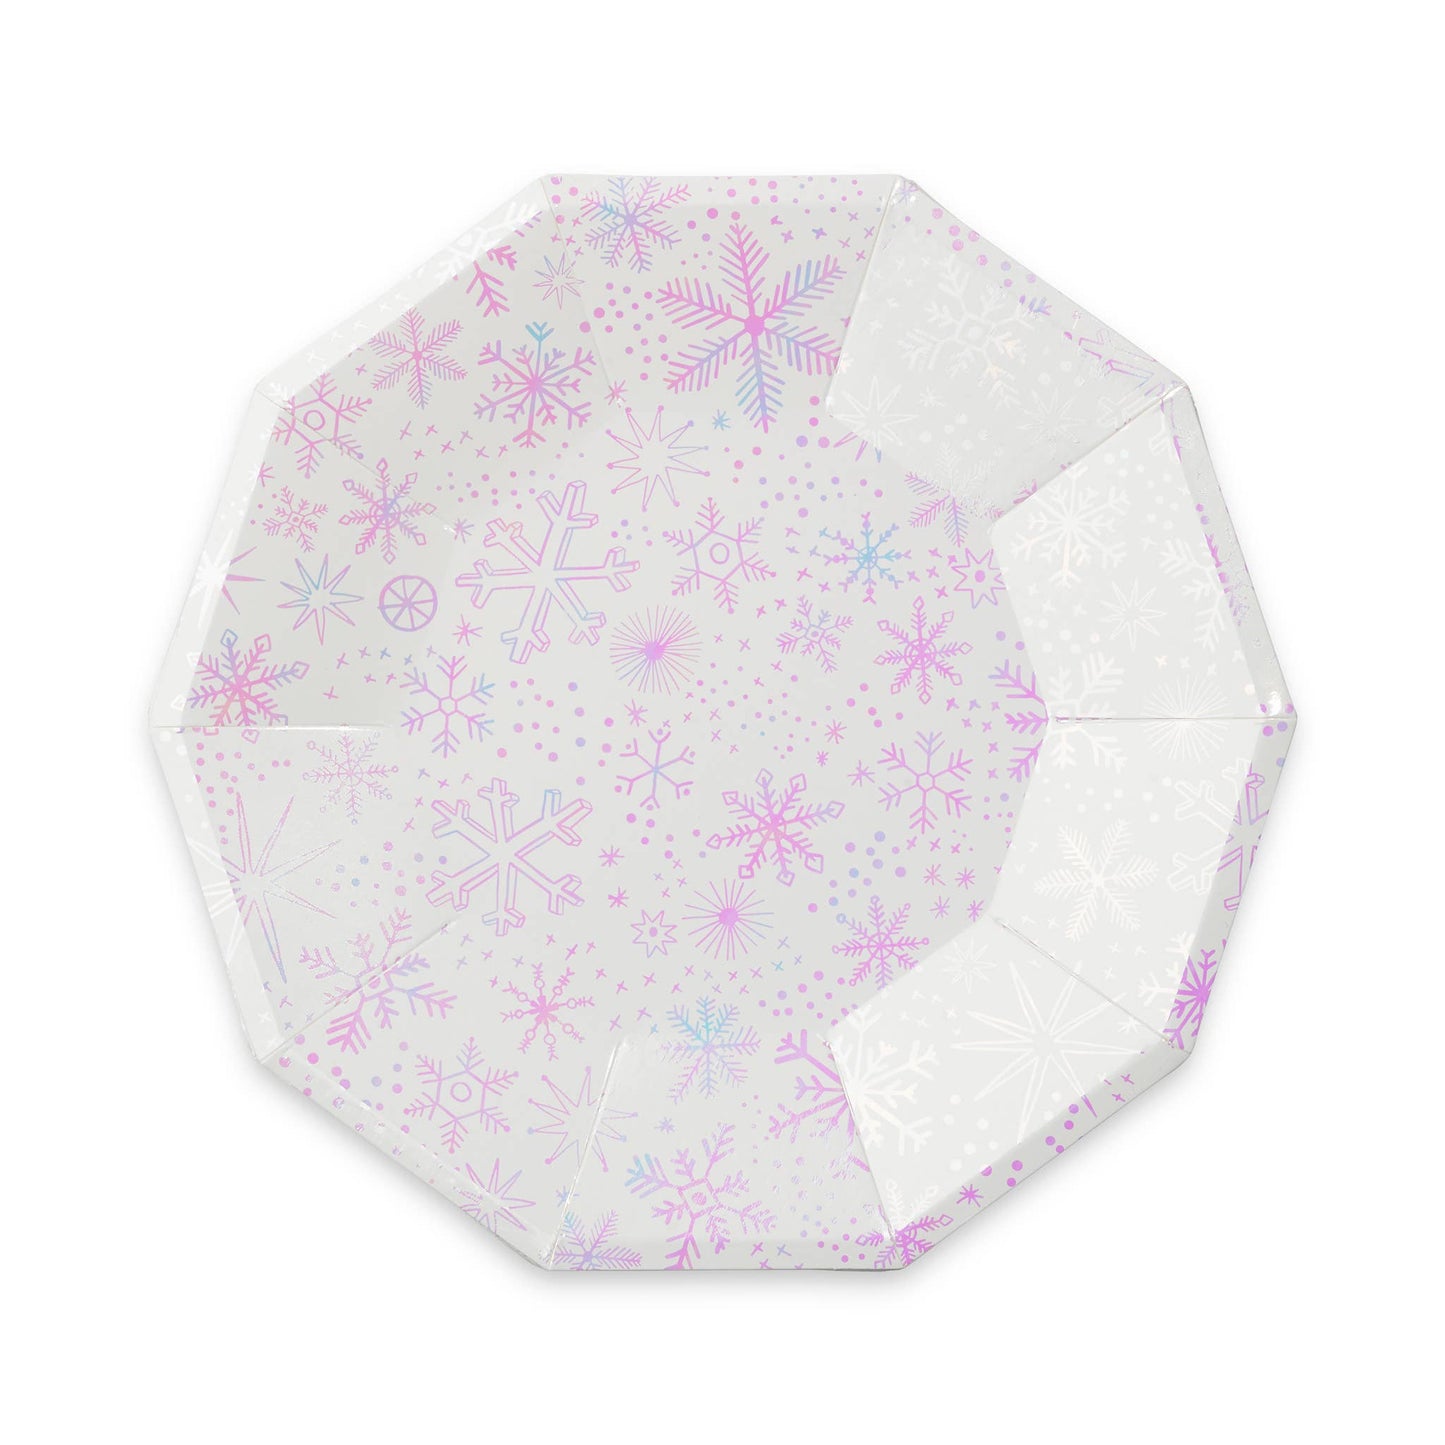 Frosted Snowflake Large Plates (8 pk)